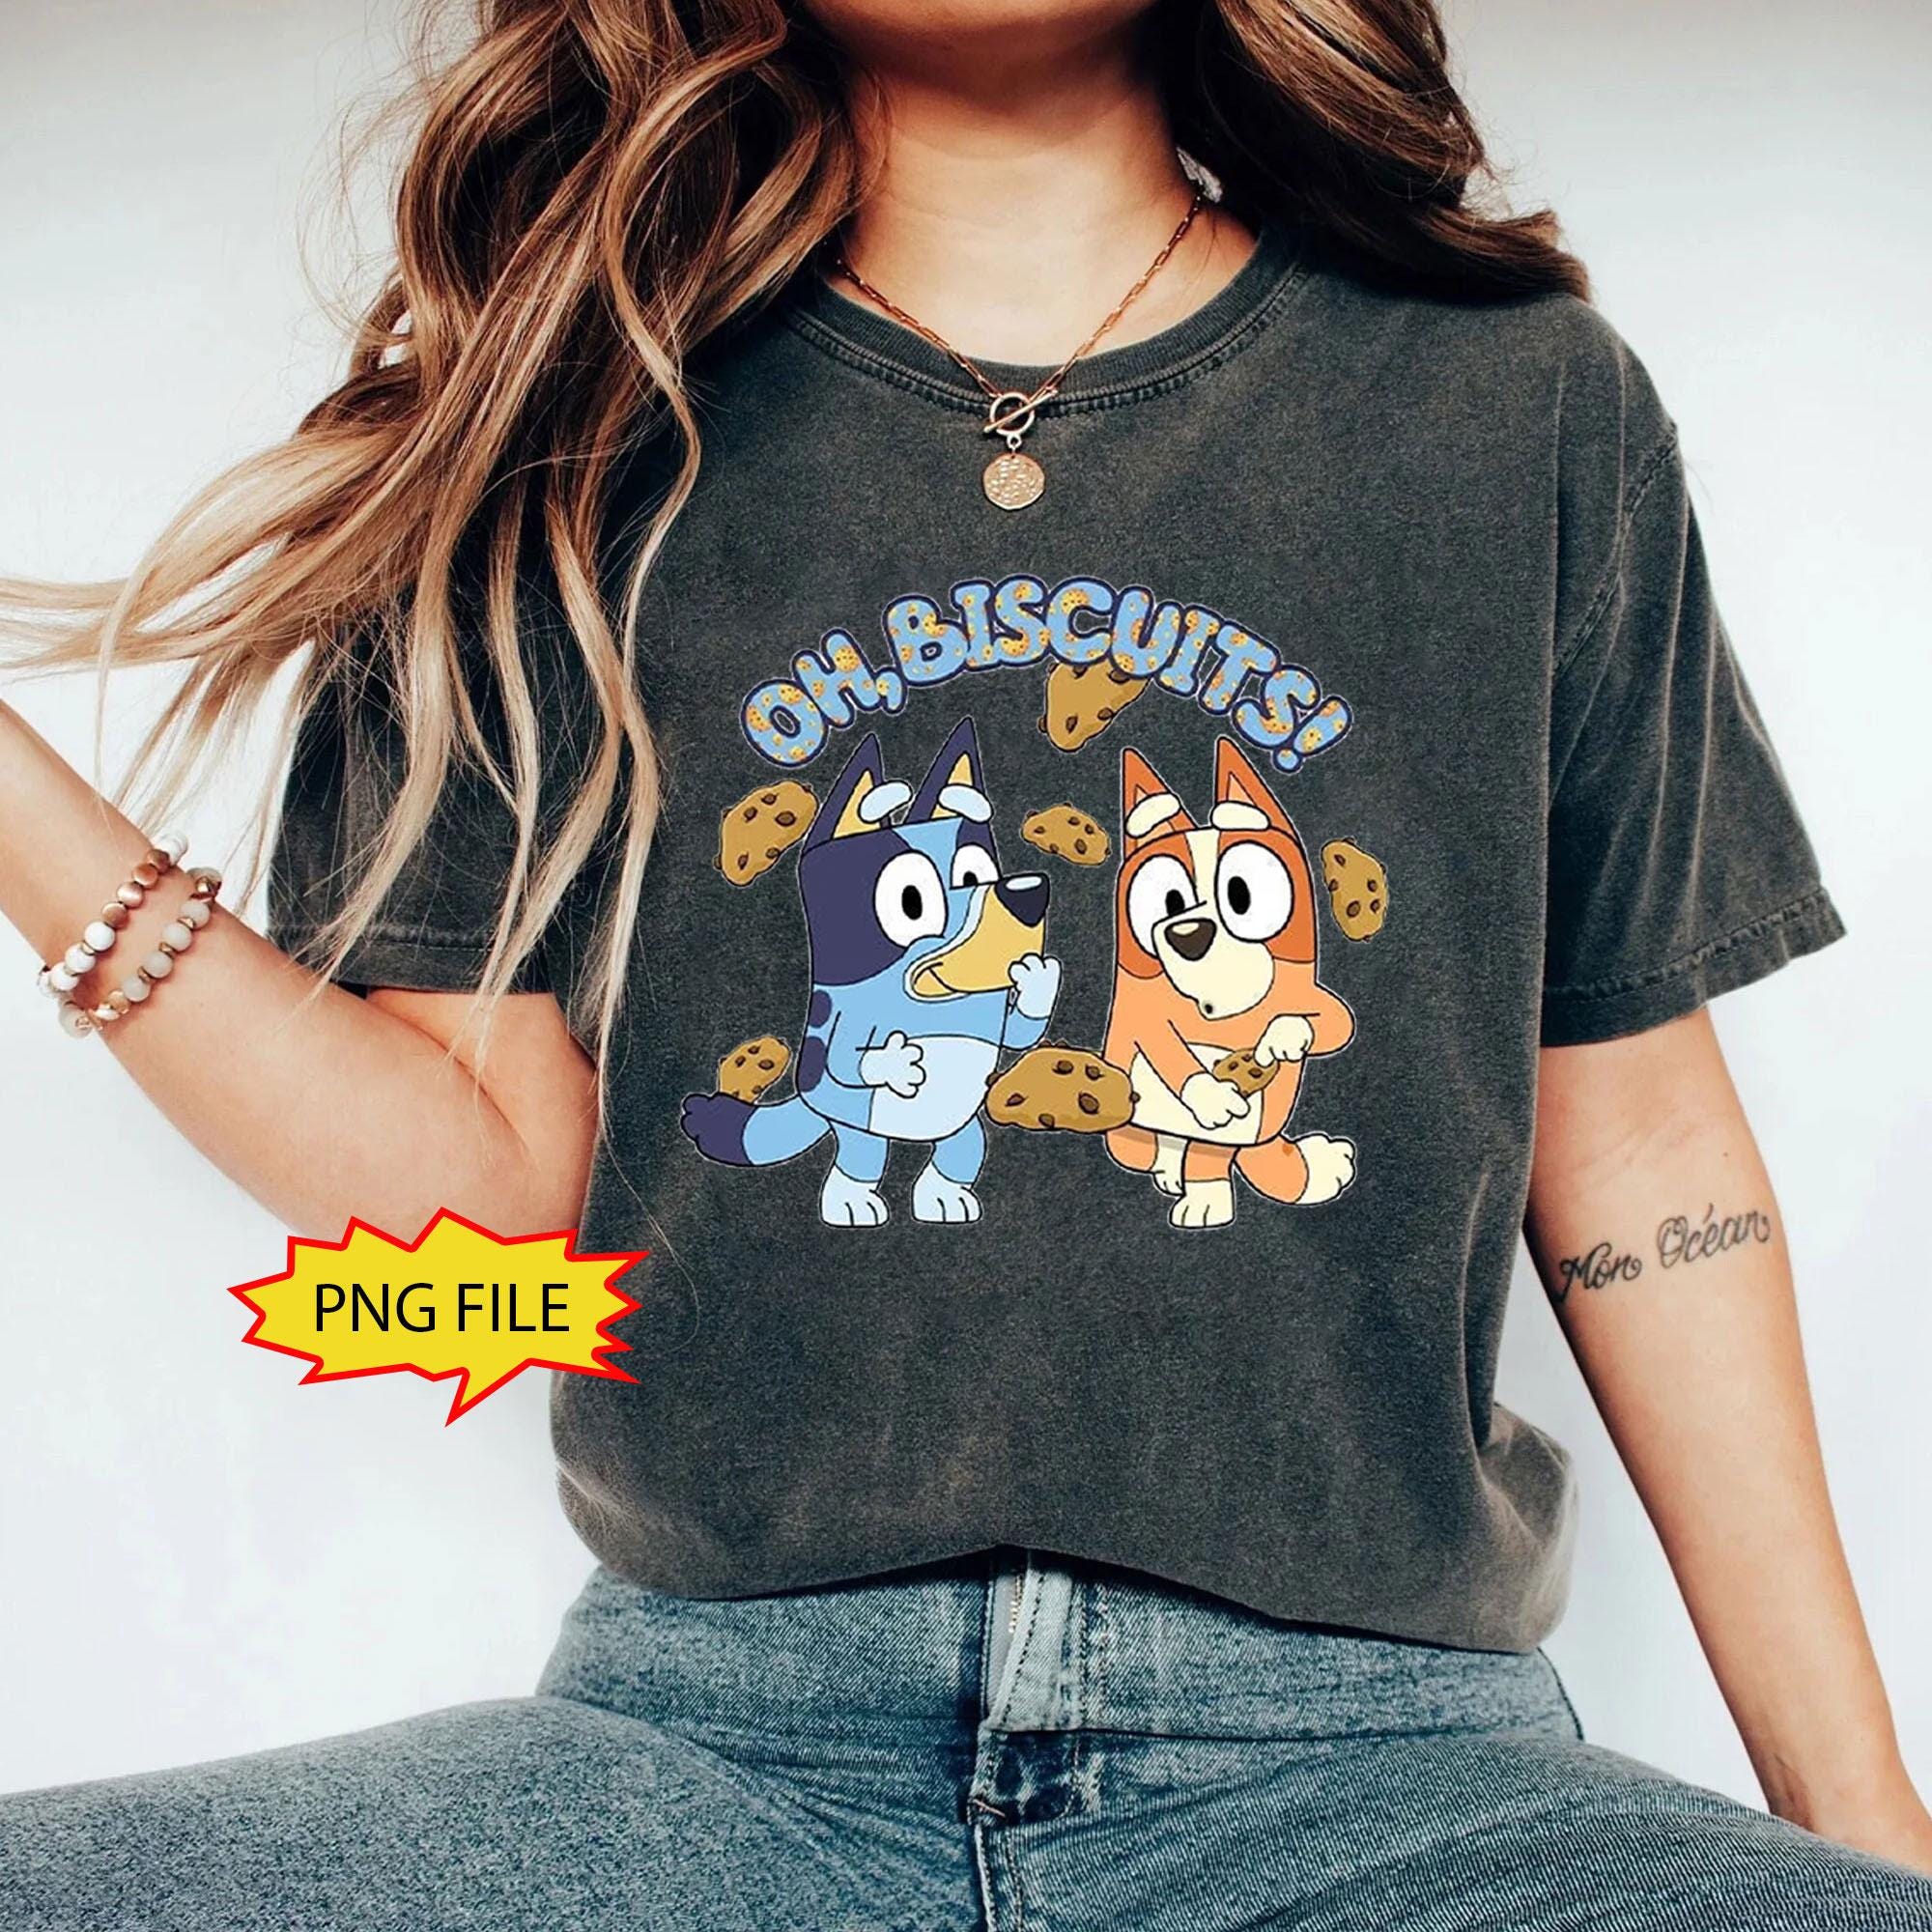 Oh Biscuits Cute Bluey Png, Bluey The Eras Tour Png, Bluey Png, Bluey And Friend Png, Bluey Family Png, Bluey Bingo Png